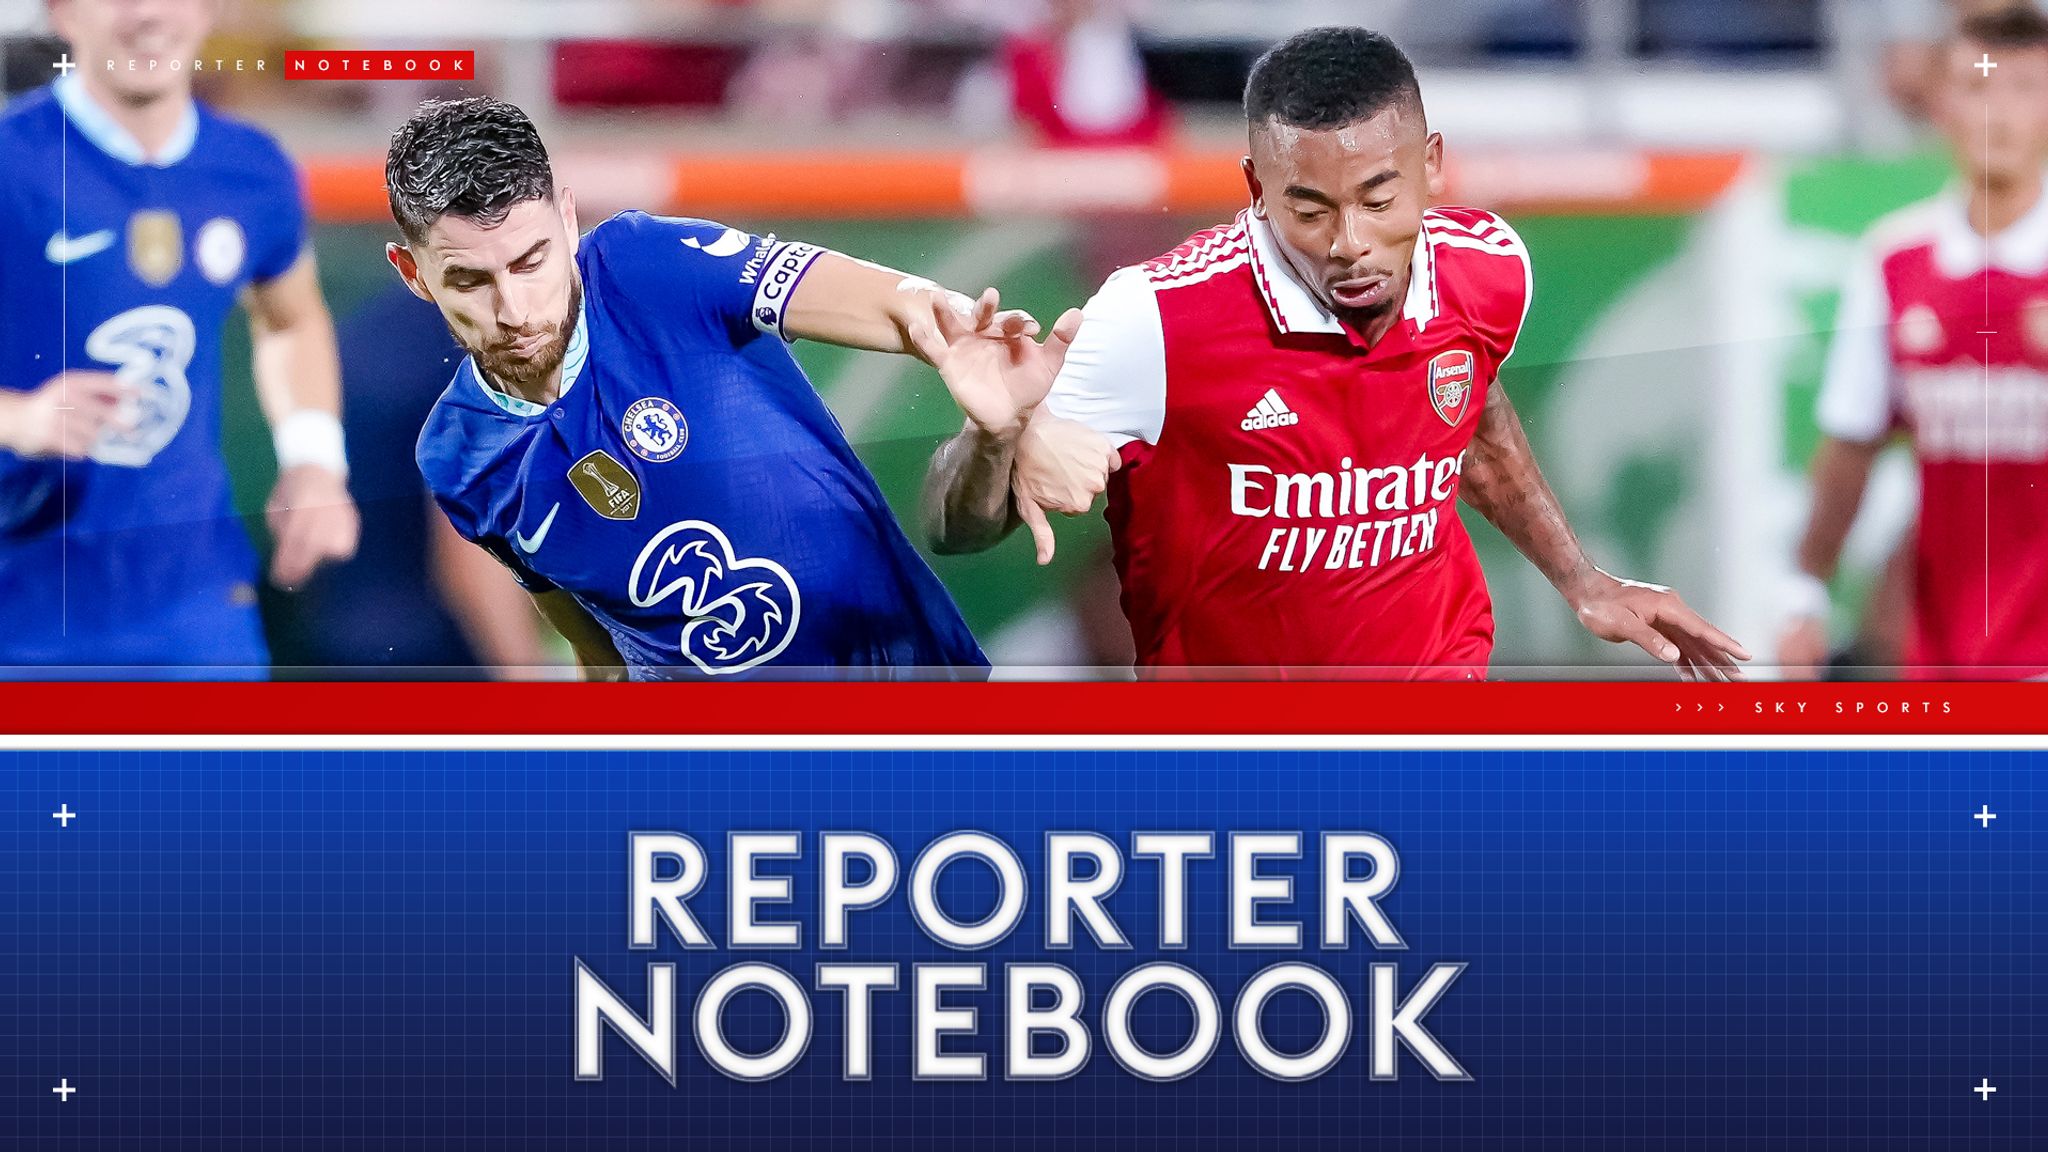 THE NOTEBOOK: Chelsea lose AGAIN under their third manager in as